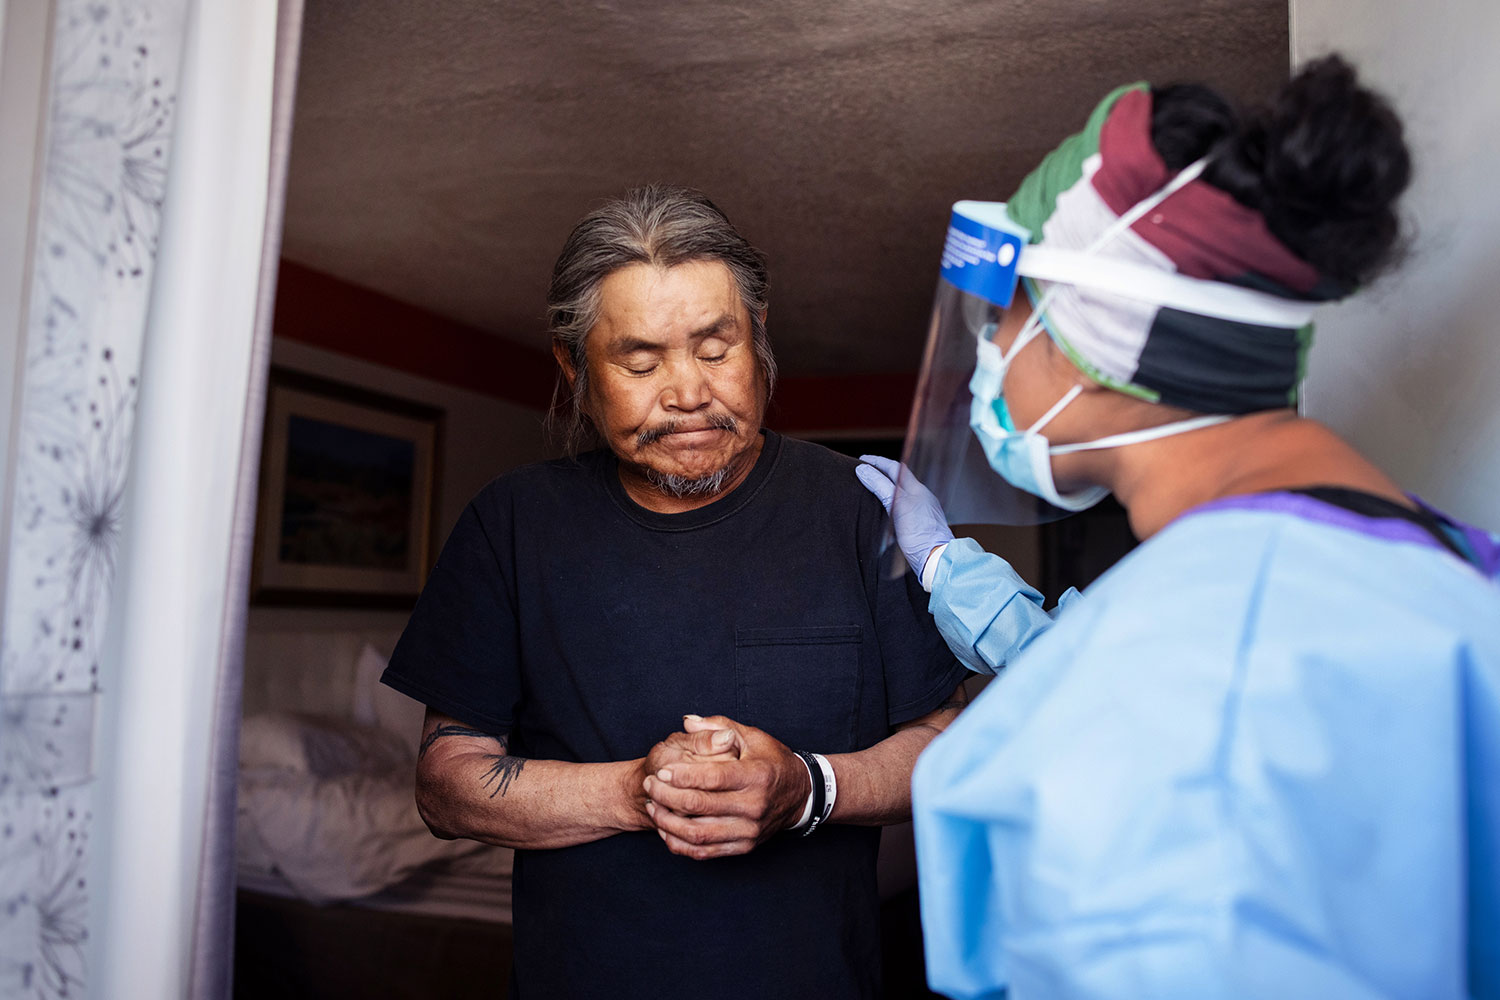 A health professional in a mask, face shield, and surgical gown places her hand on a man's shoulder. The man is a resident of the Navajo Nation